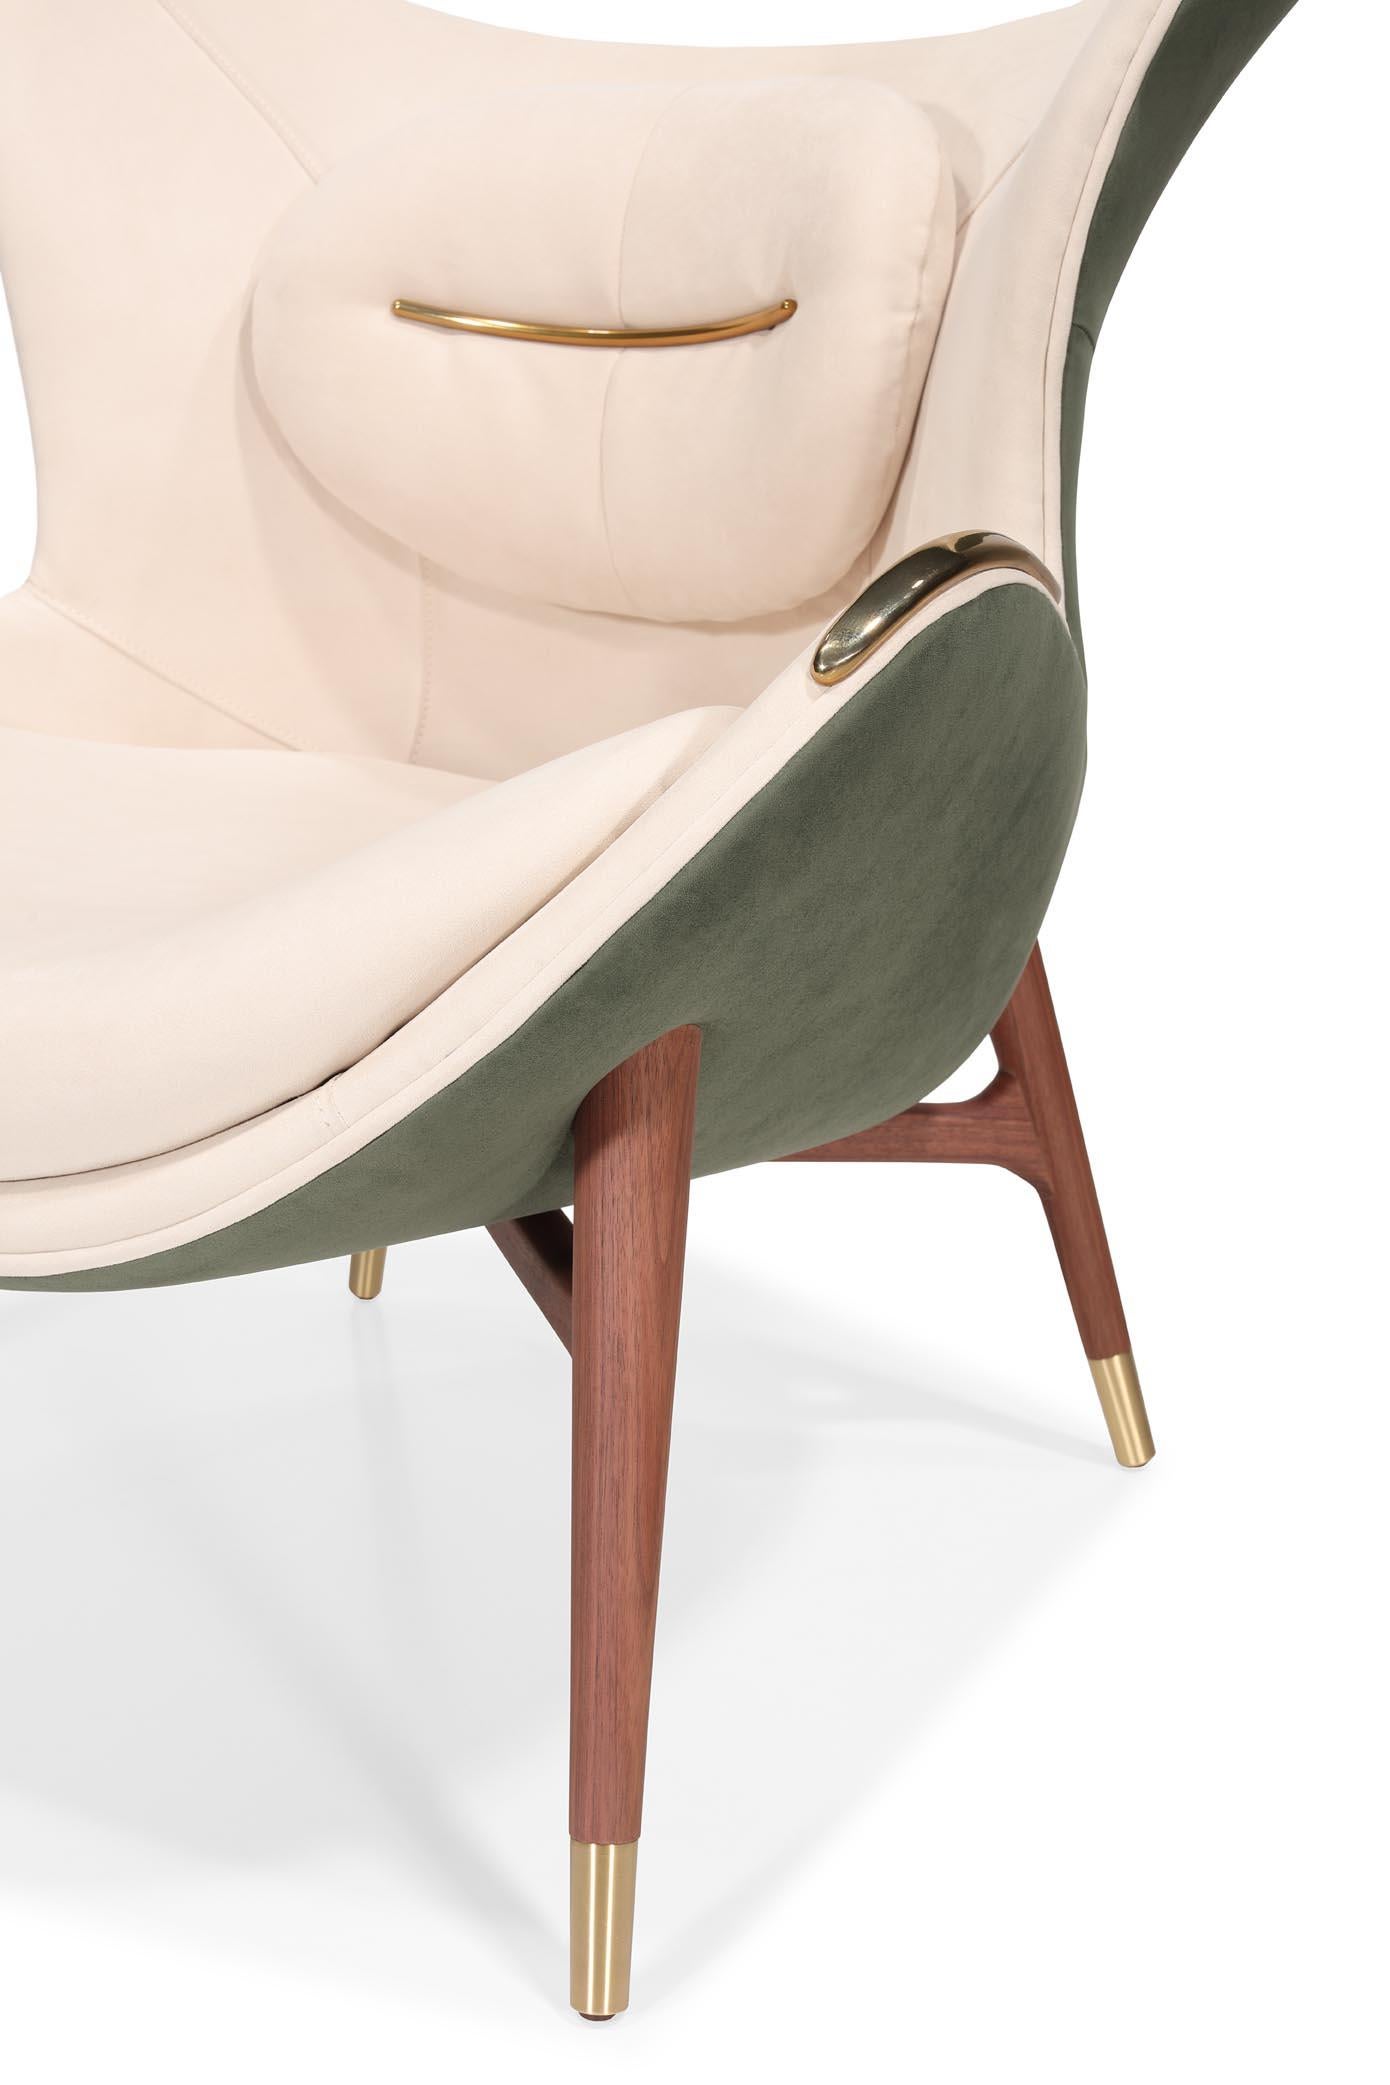 A true statement of luxury
Combining the finest and ancient craftsmanship with luxurious levels of design, quality, and comfort. 

Nazaré Armchair, Modern Collection, Walnut Wood, Suede Fabric - Traditional Handcrafted in Portugal 

It is made